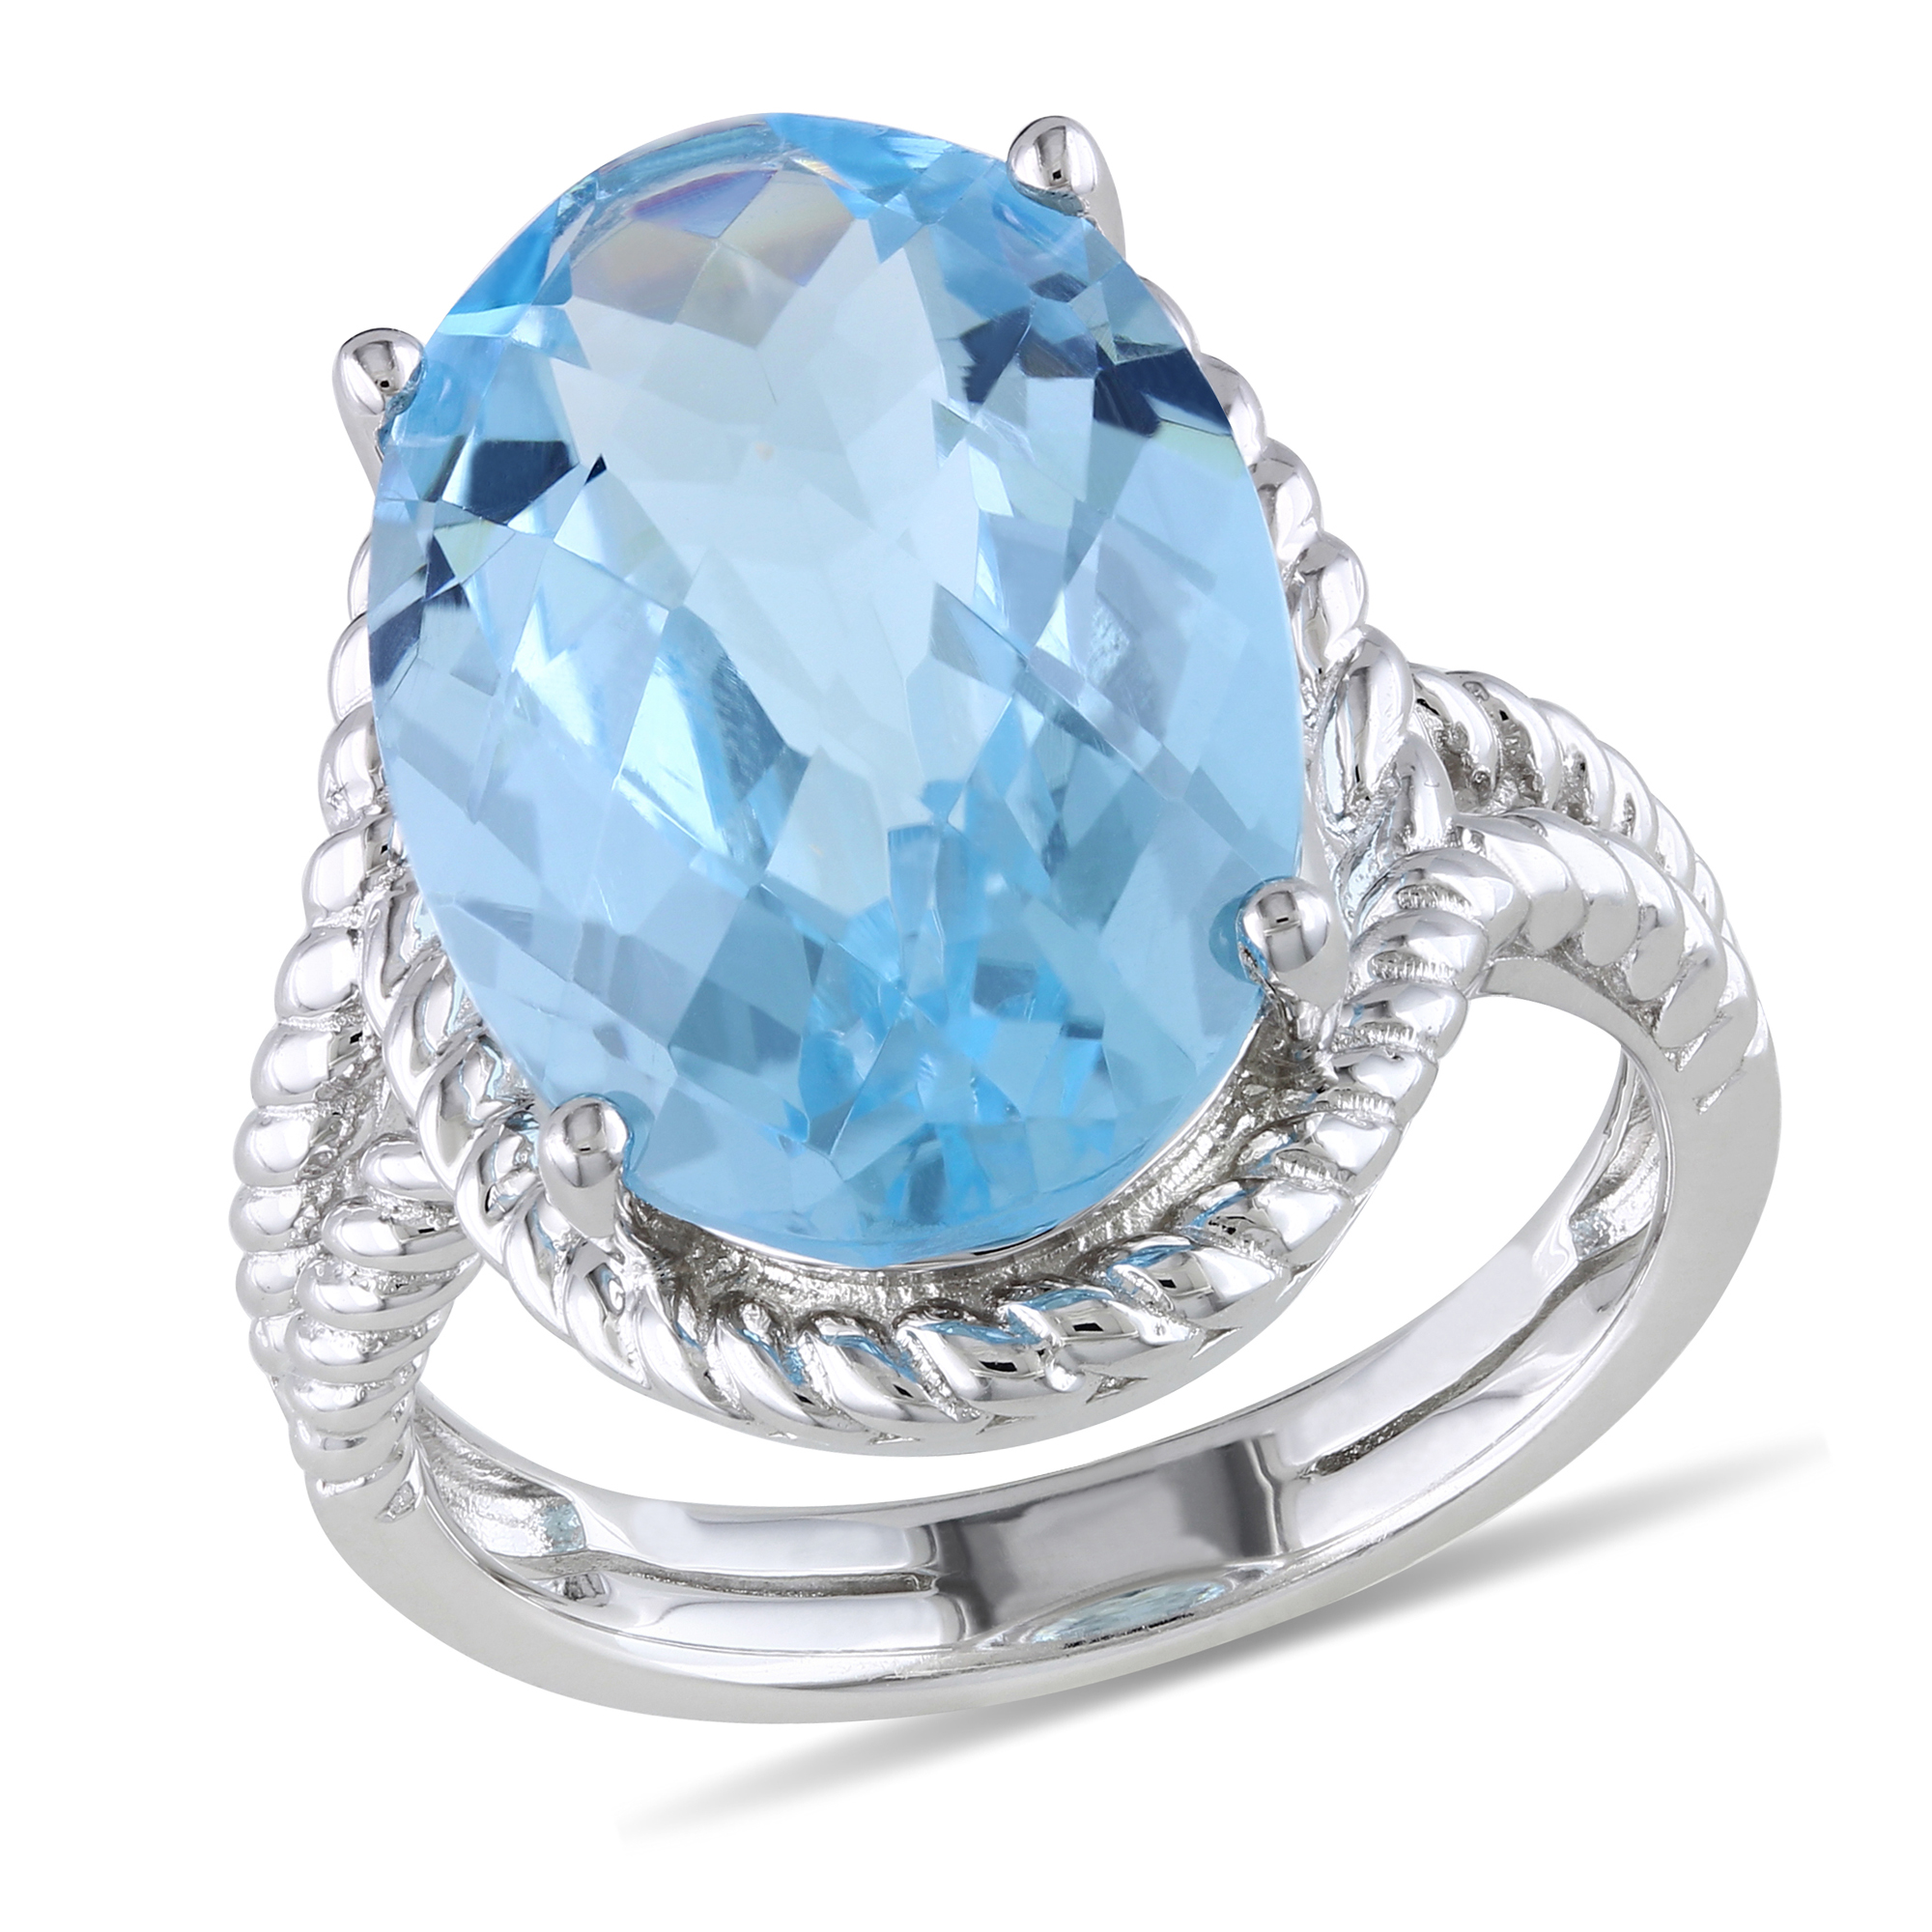 Amour 12 Carat T.G.W. Blue Topaz Fashion Ring in Sterling Silver